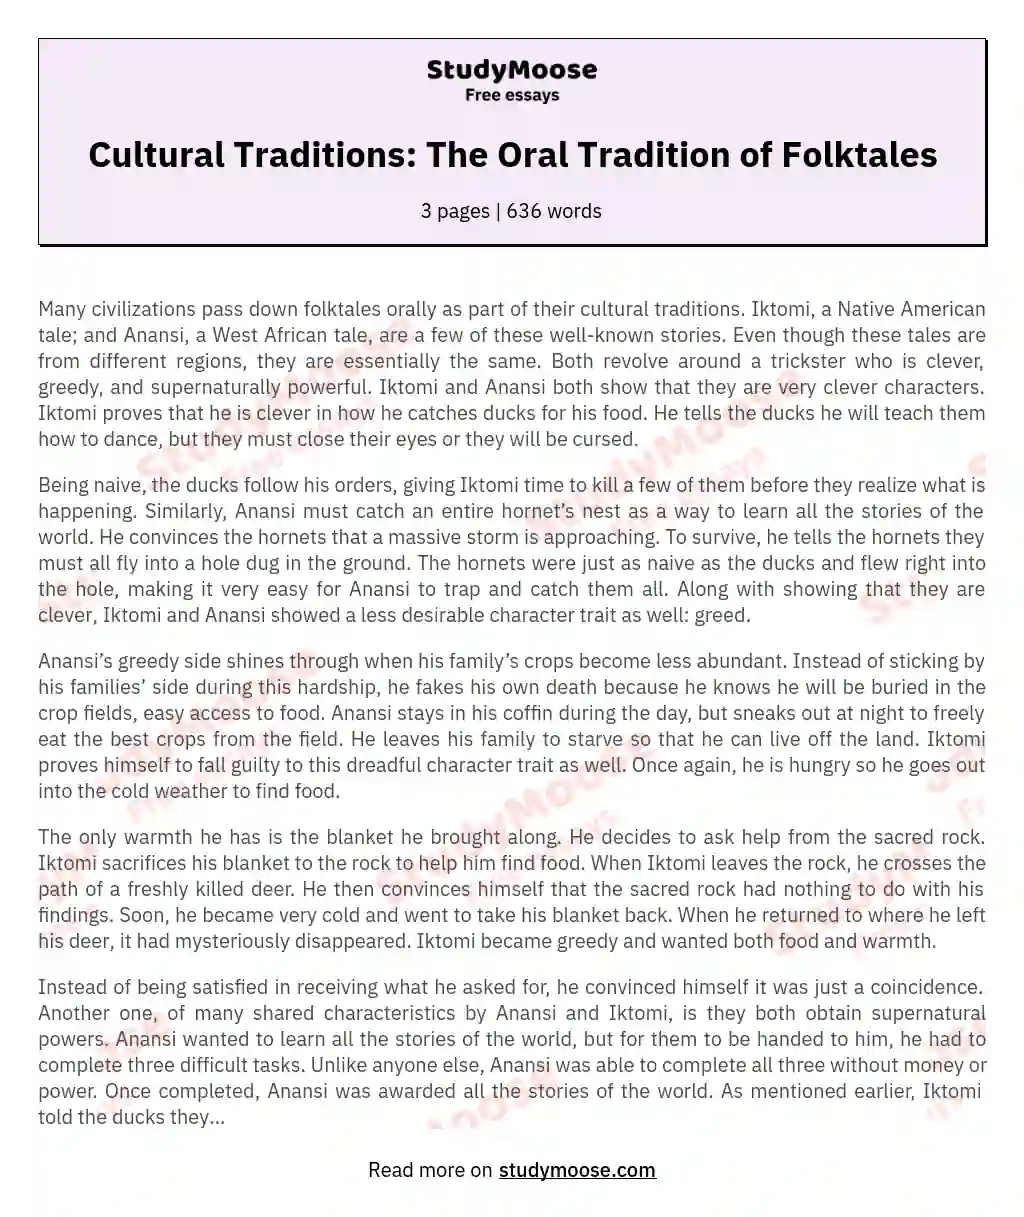 Cultural Traditions: The Oral Tradition of Folktales essay